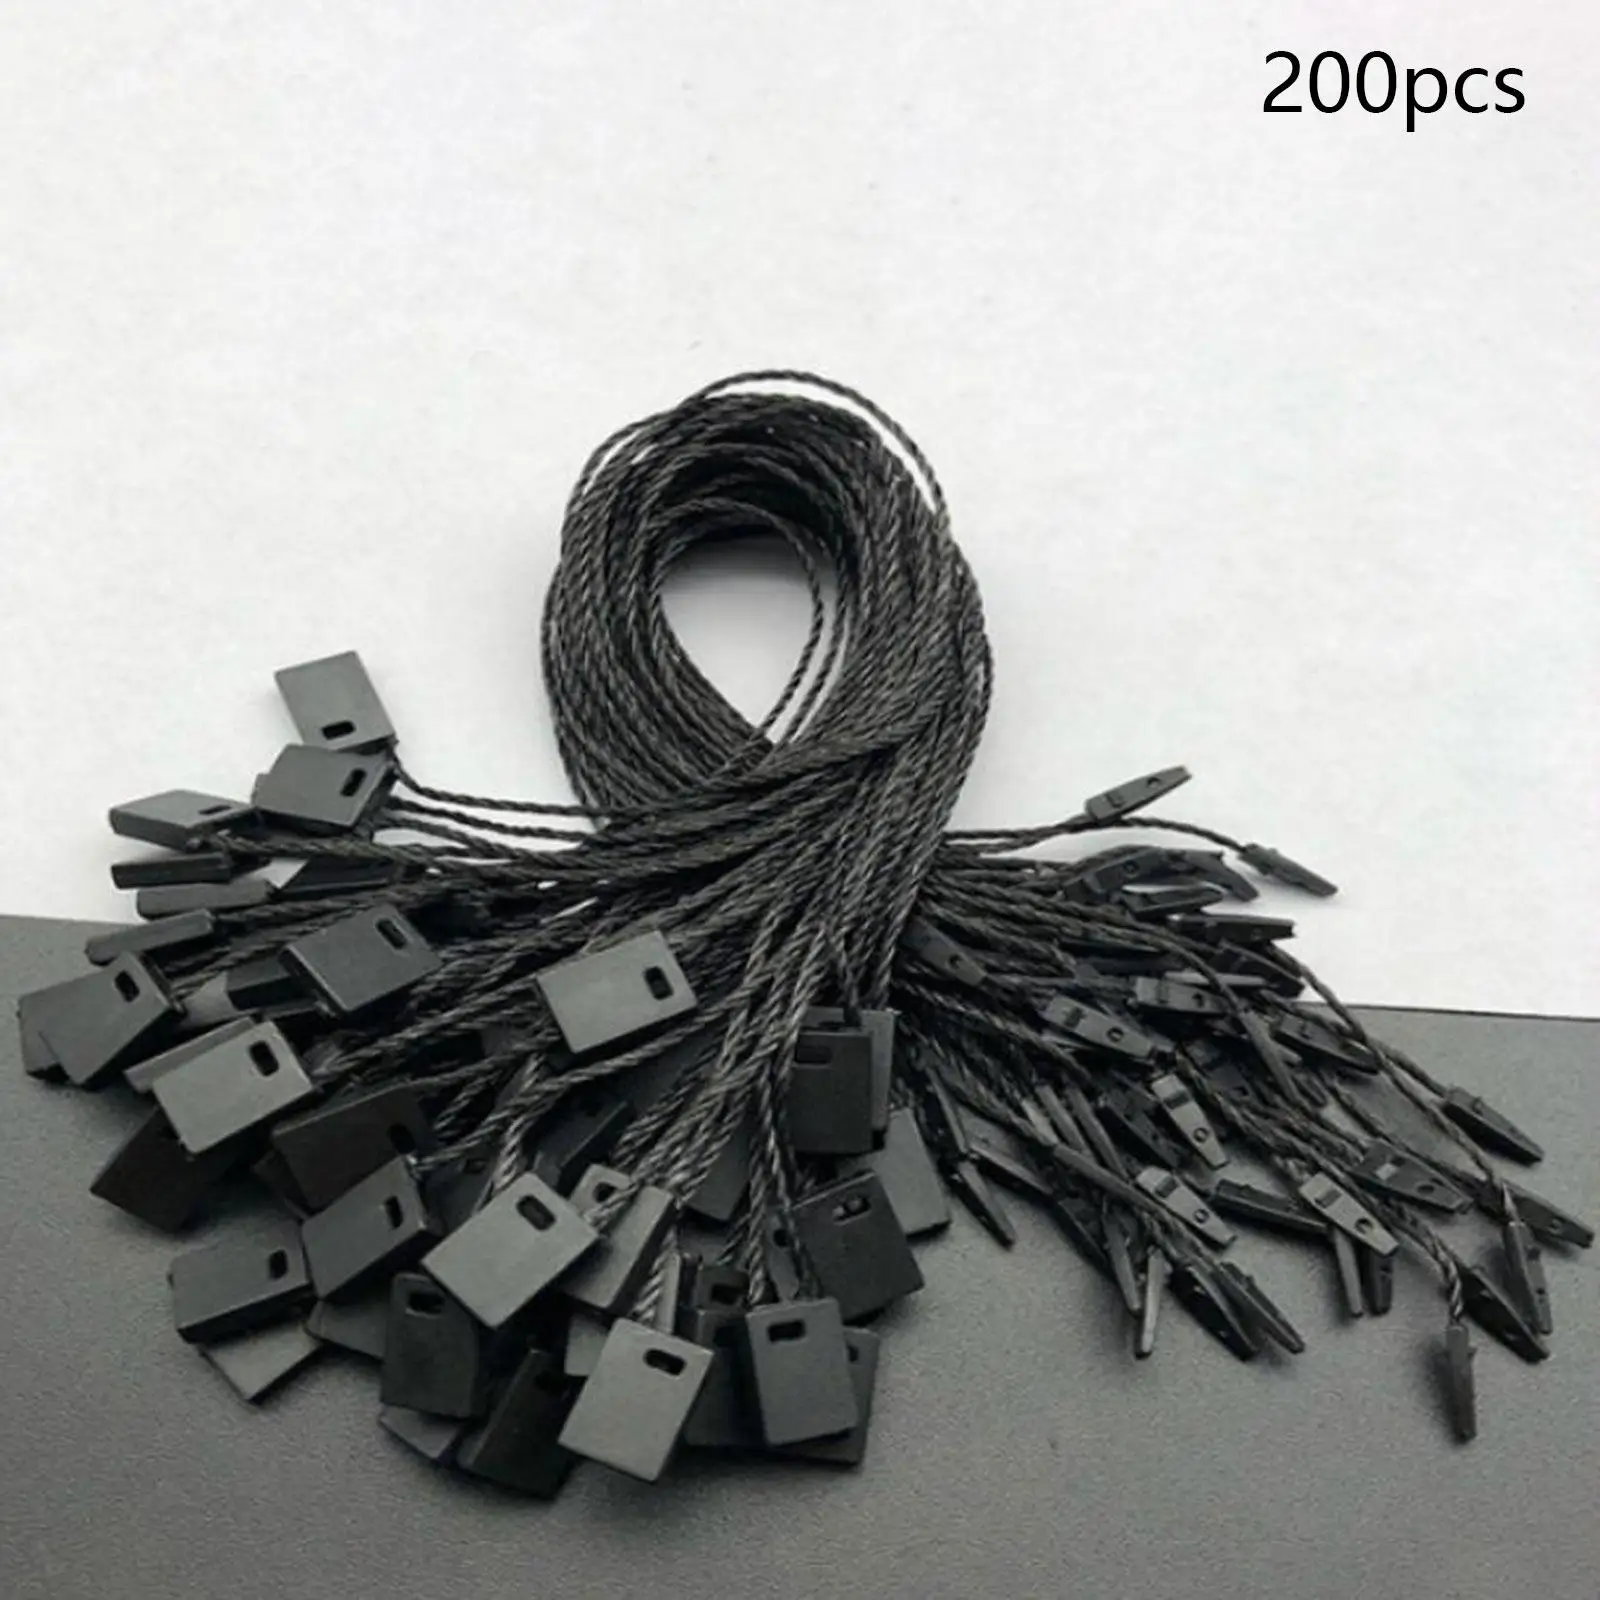 200Pcs Hang Tag Strings Durable Easy to Attach DIY Lightweight Crafts Tag Hanging Ropes for Retail Gift Tags Toys Shoes Luggage